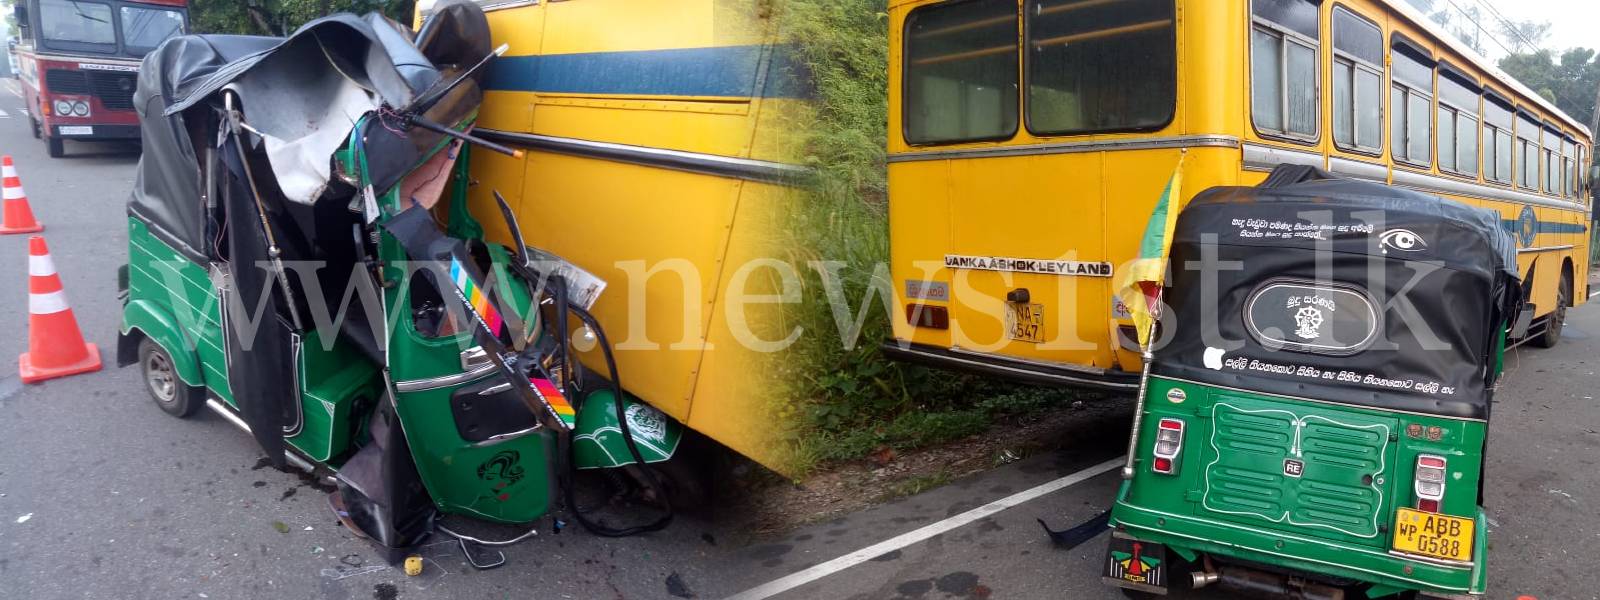 Two people critical in bus-three wheeler collision